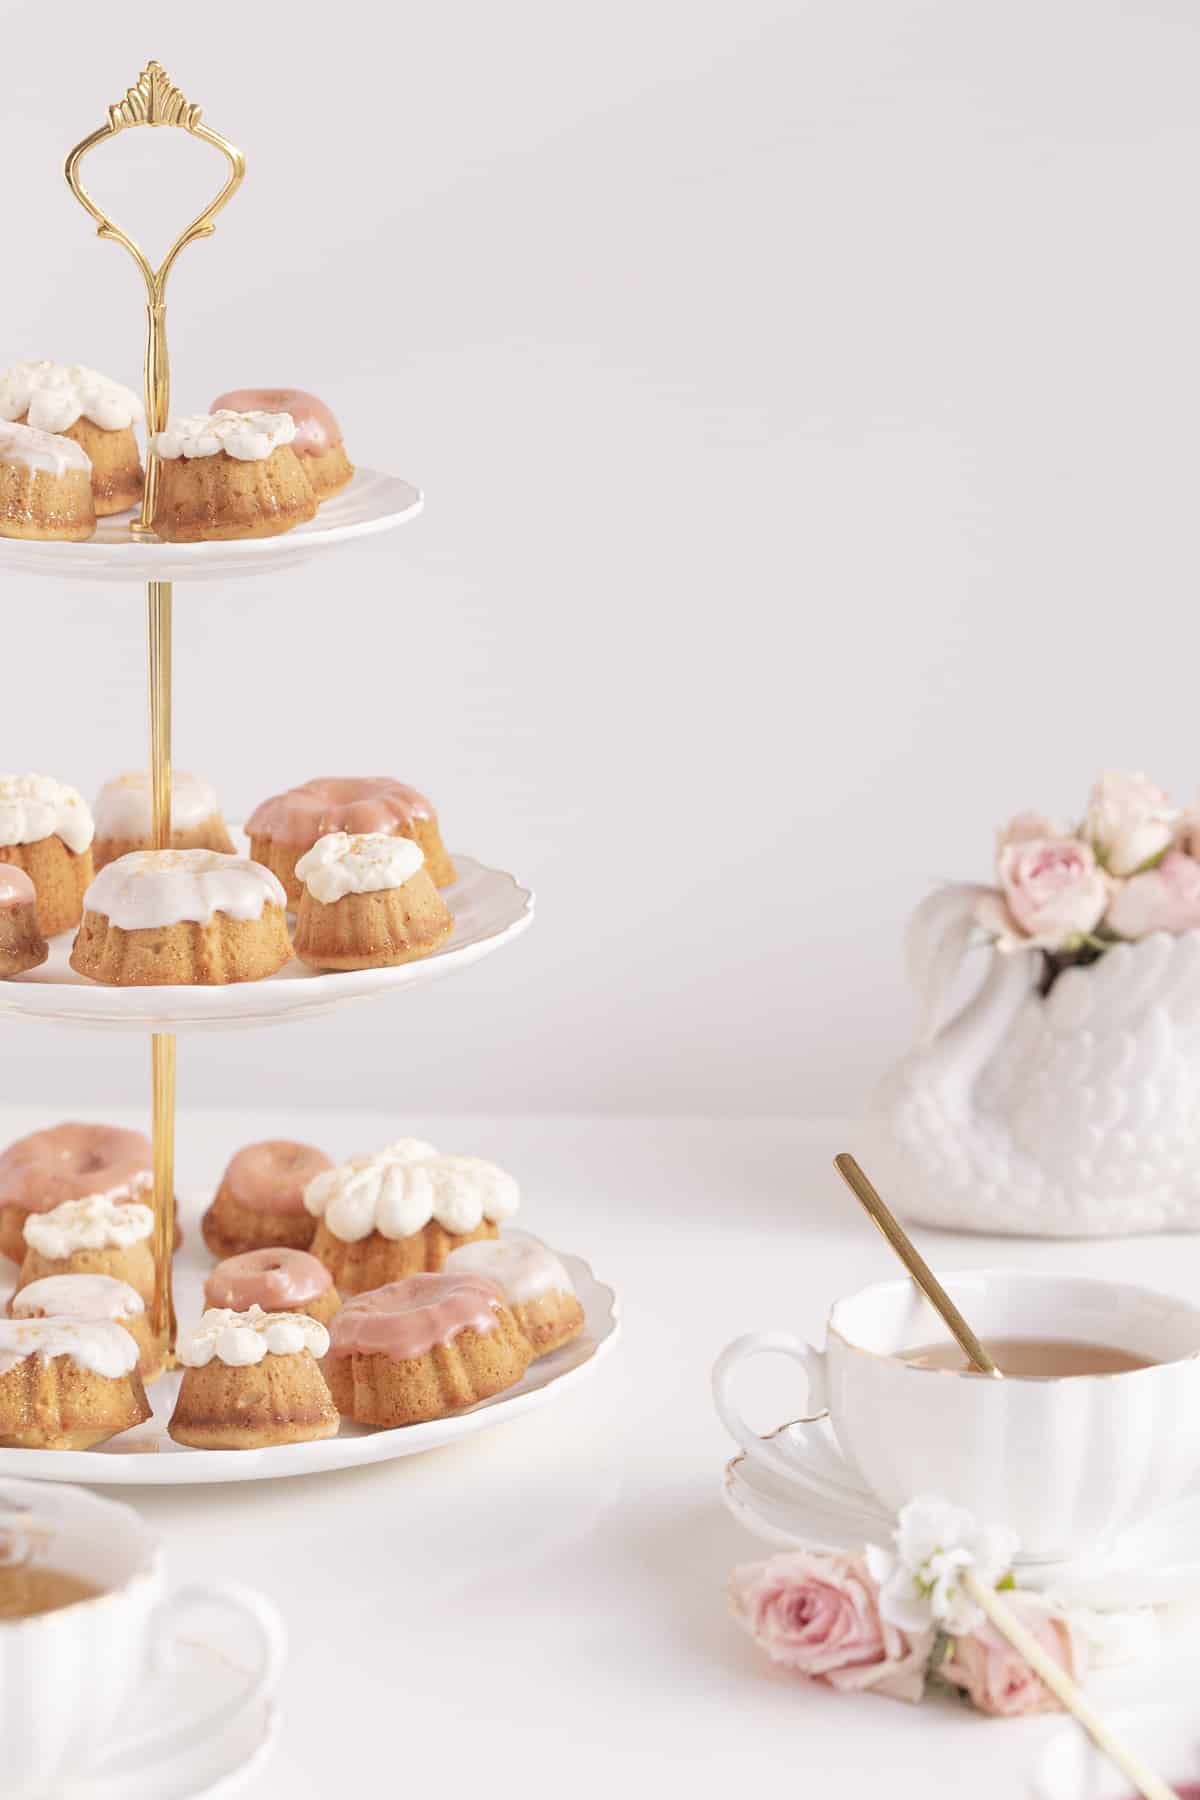 Honey Cupcakes on a cake stand with a vase and flowers